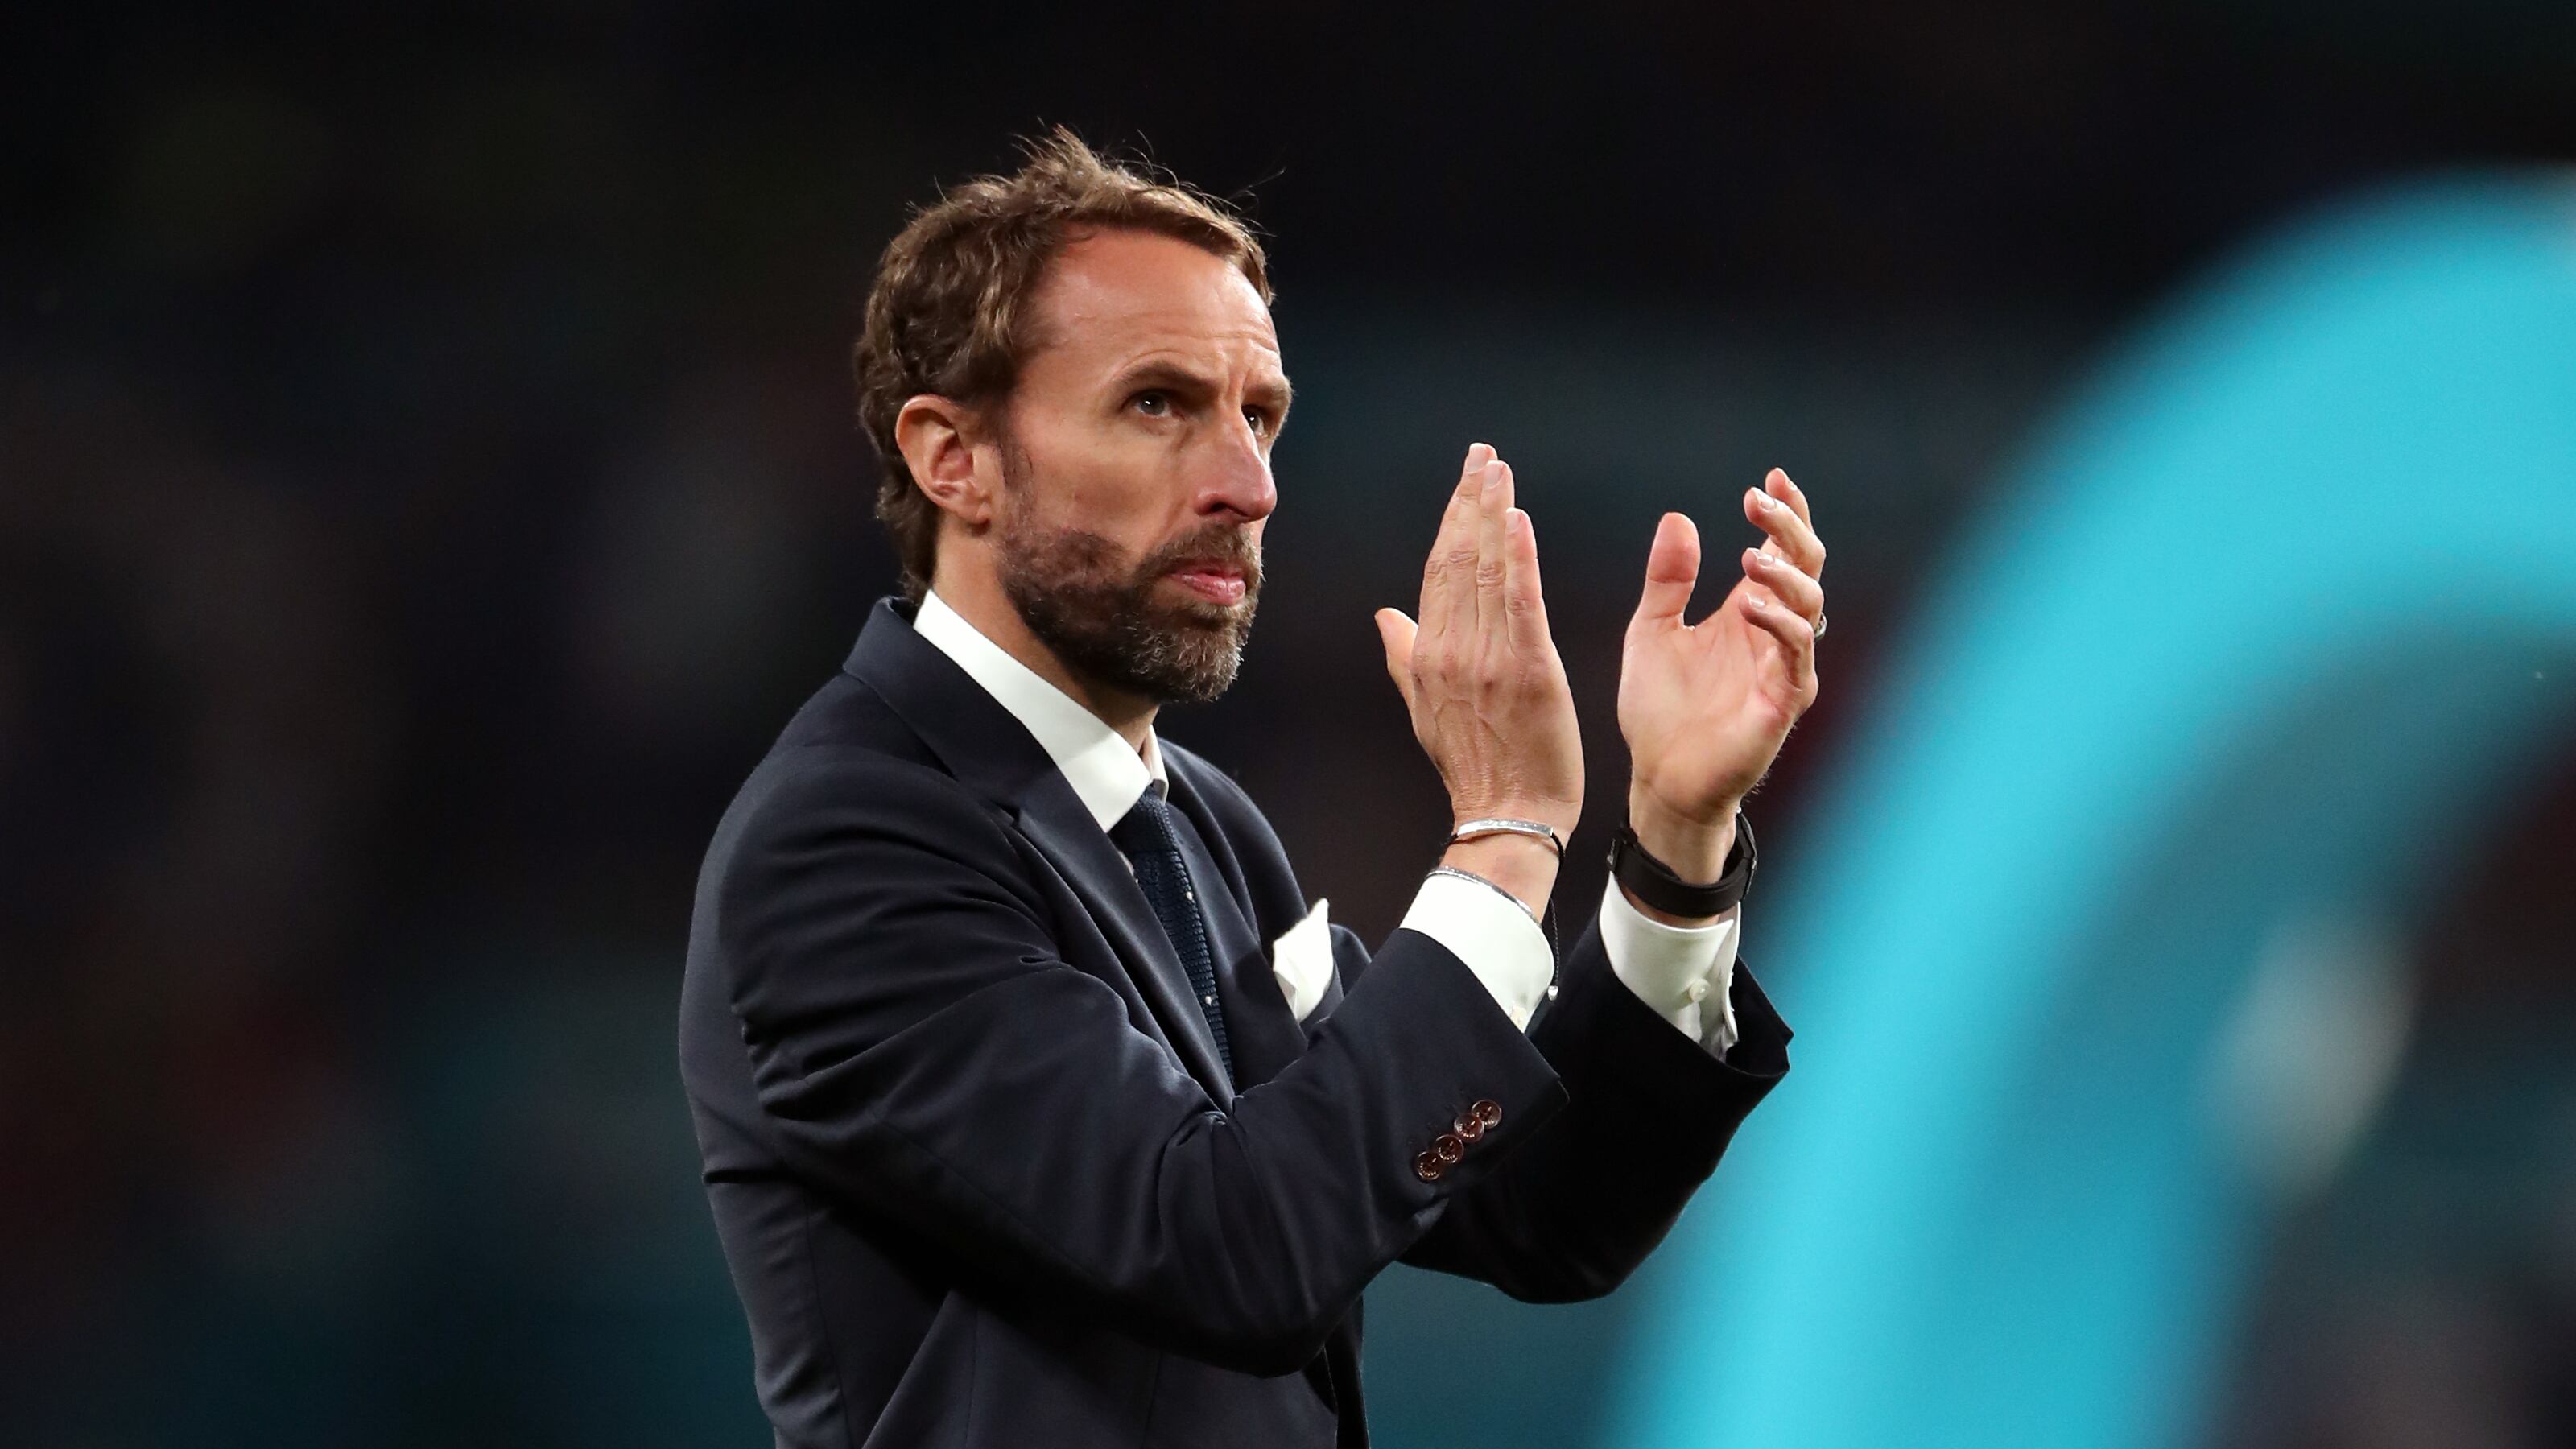 Gareth Southgate’s side lost in the final of the European Championships three years ago